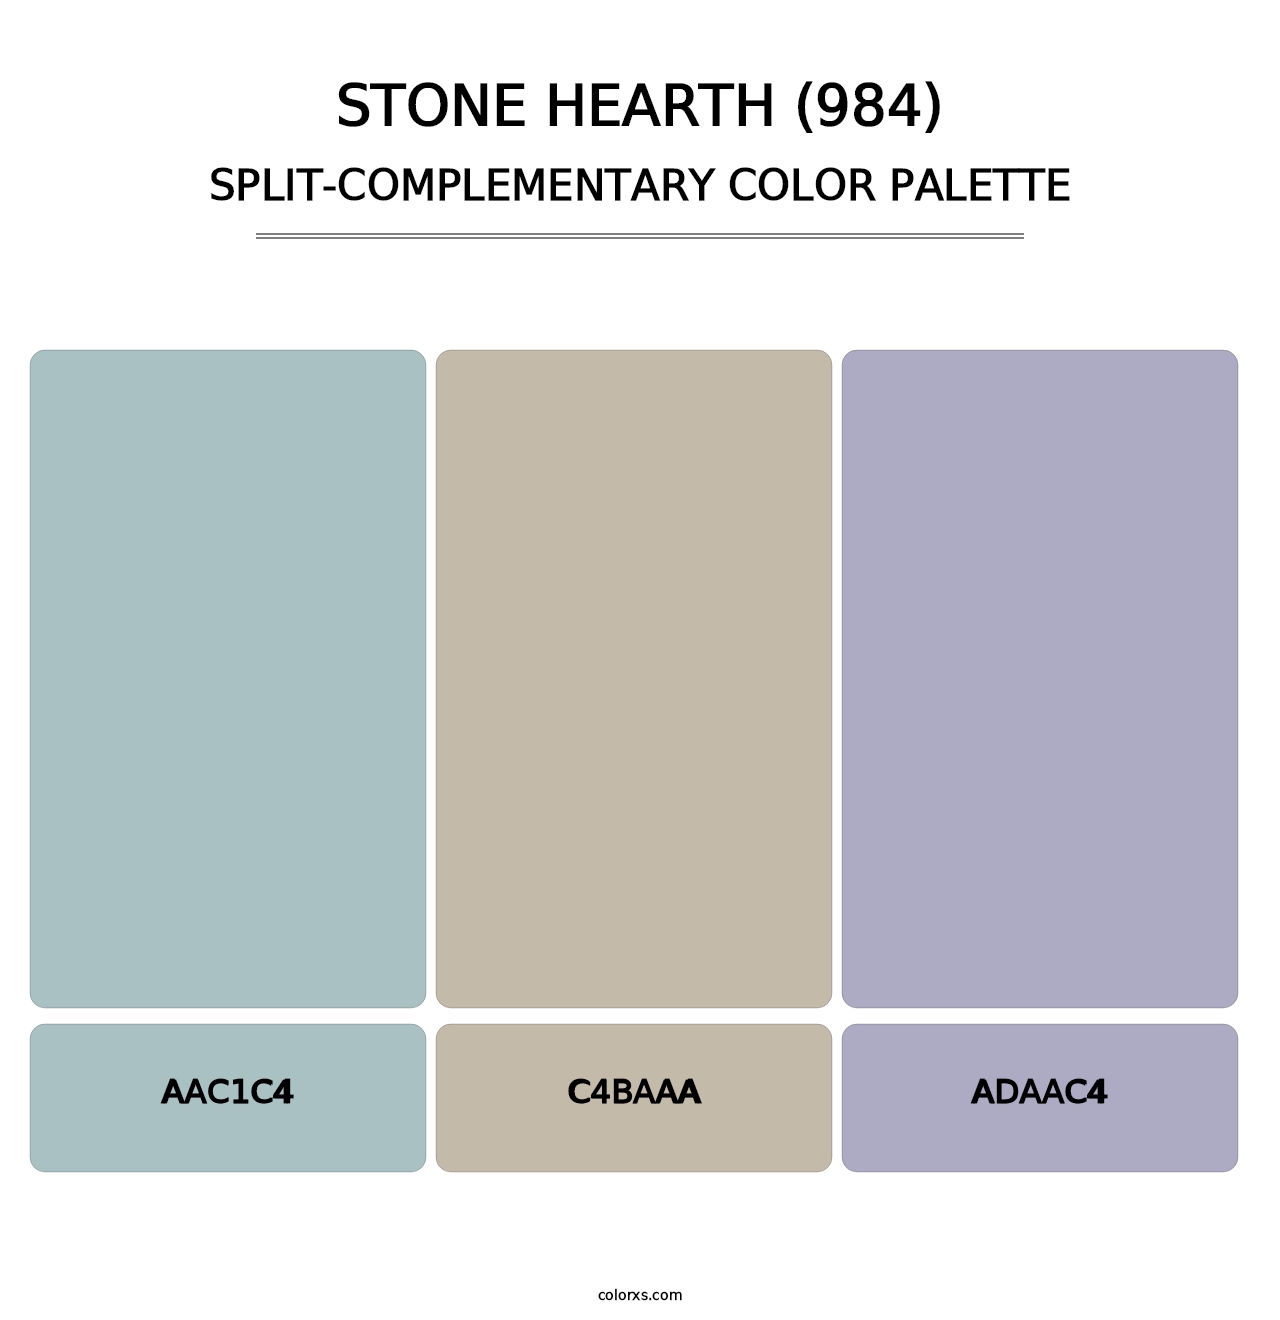 Stone Hearth (984) - Split-Complementary Color Palette